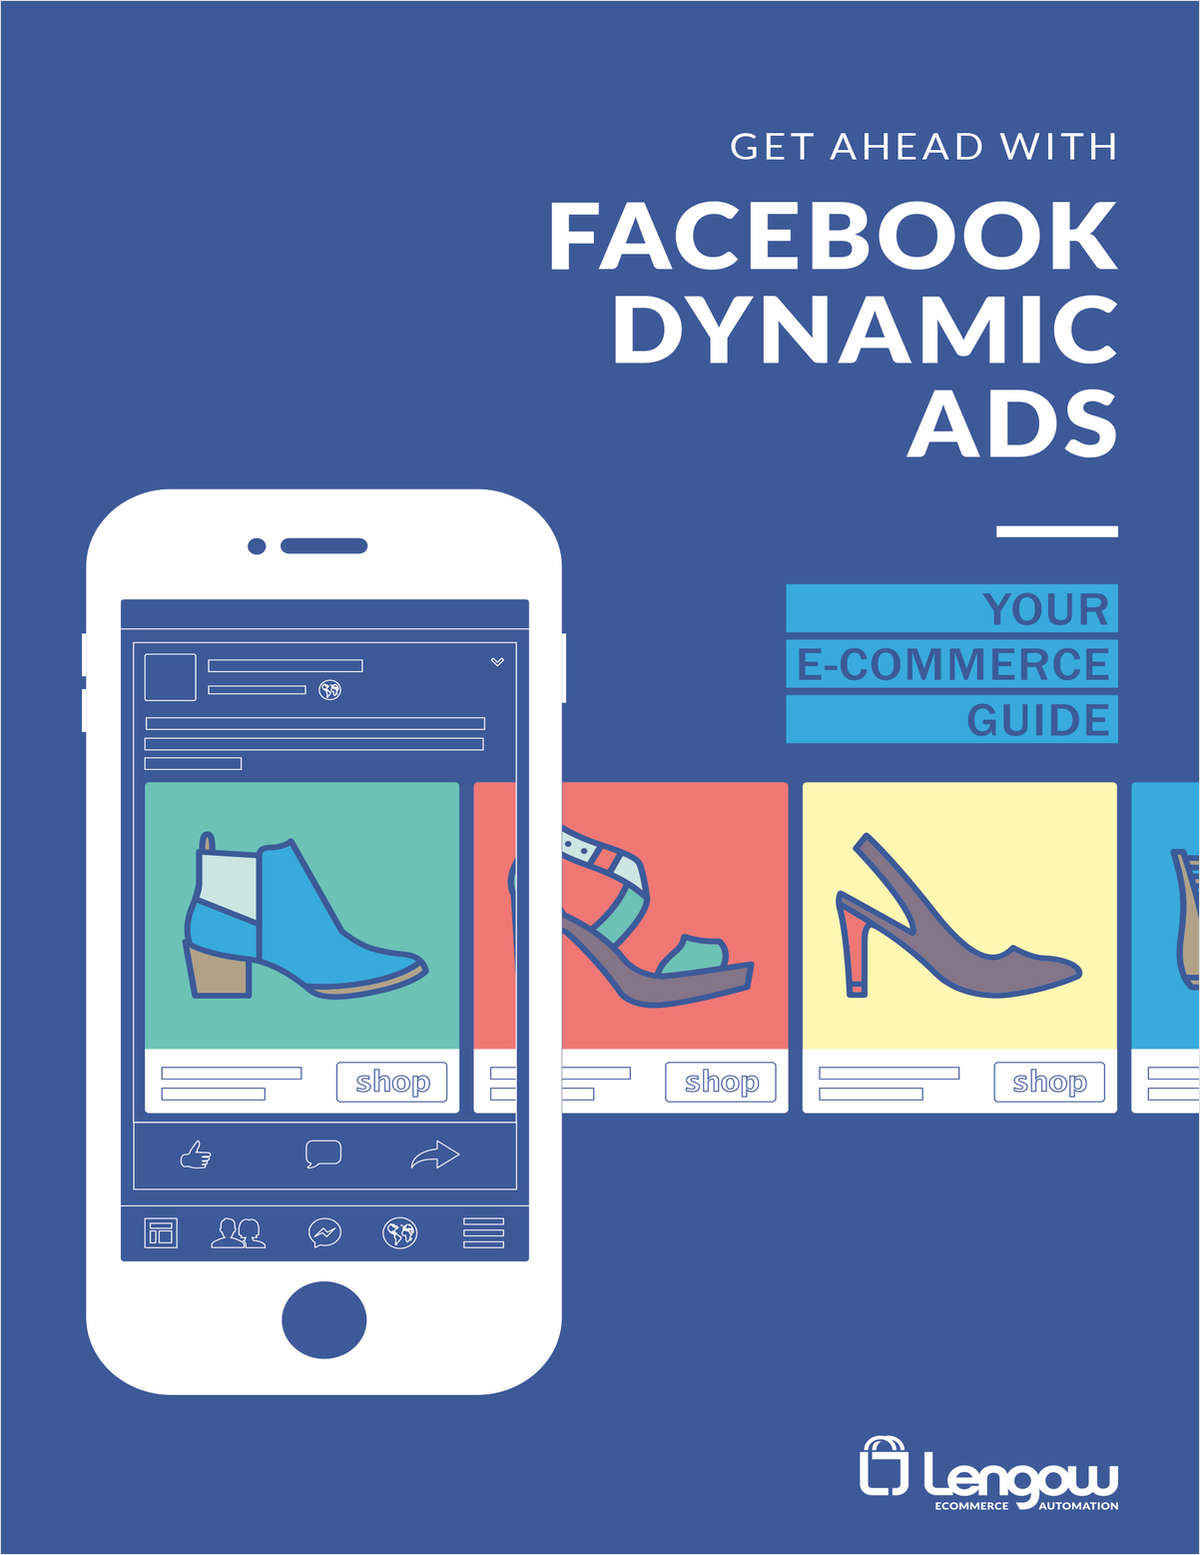 GET AHEAD WITH FACEBOOK DYNAMIC ADS